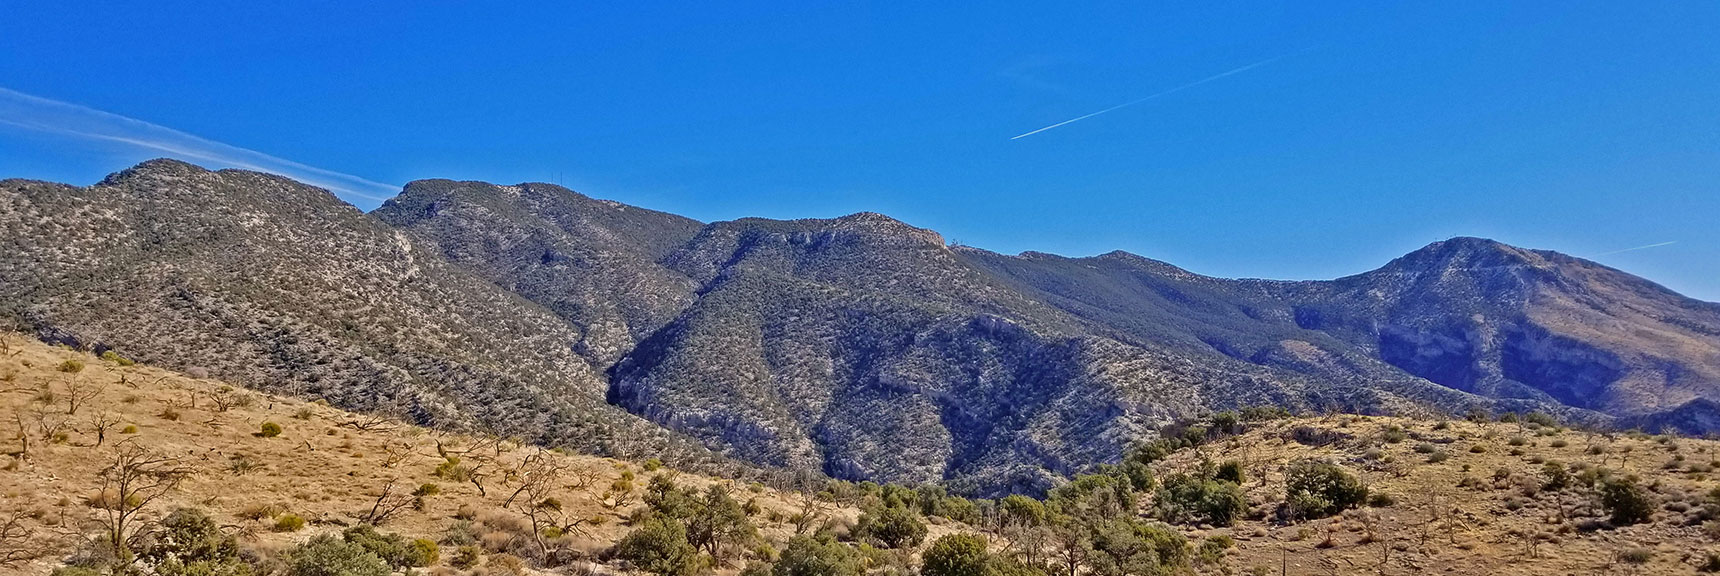 Now North, Mid and South Summits Are in View Along with Maintenance Road | Potosi Mt. Summit via Western Cliffs Ridgeline, Spring Mountains, Nevada